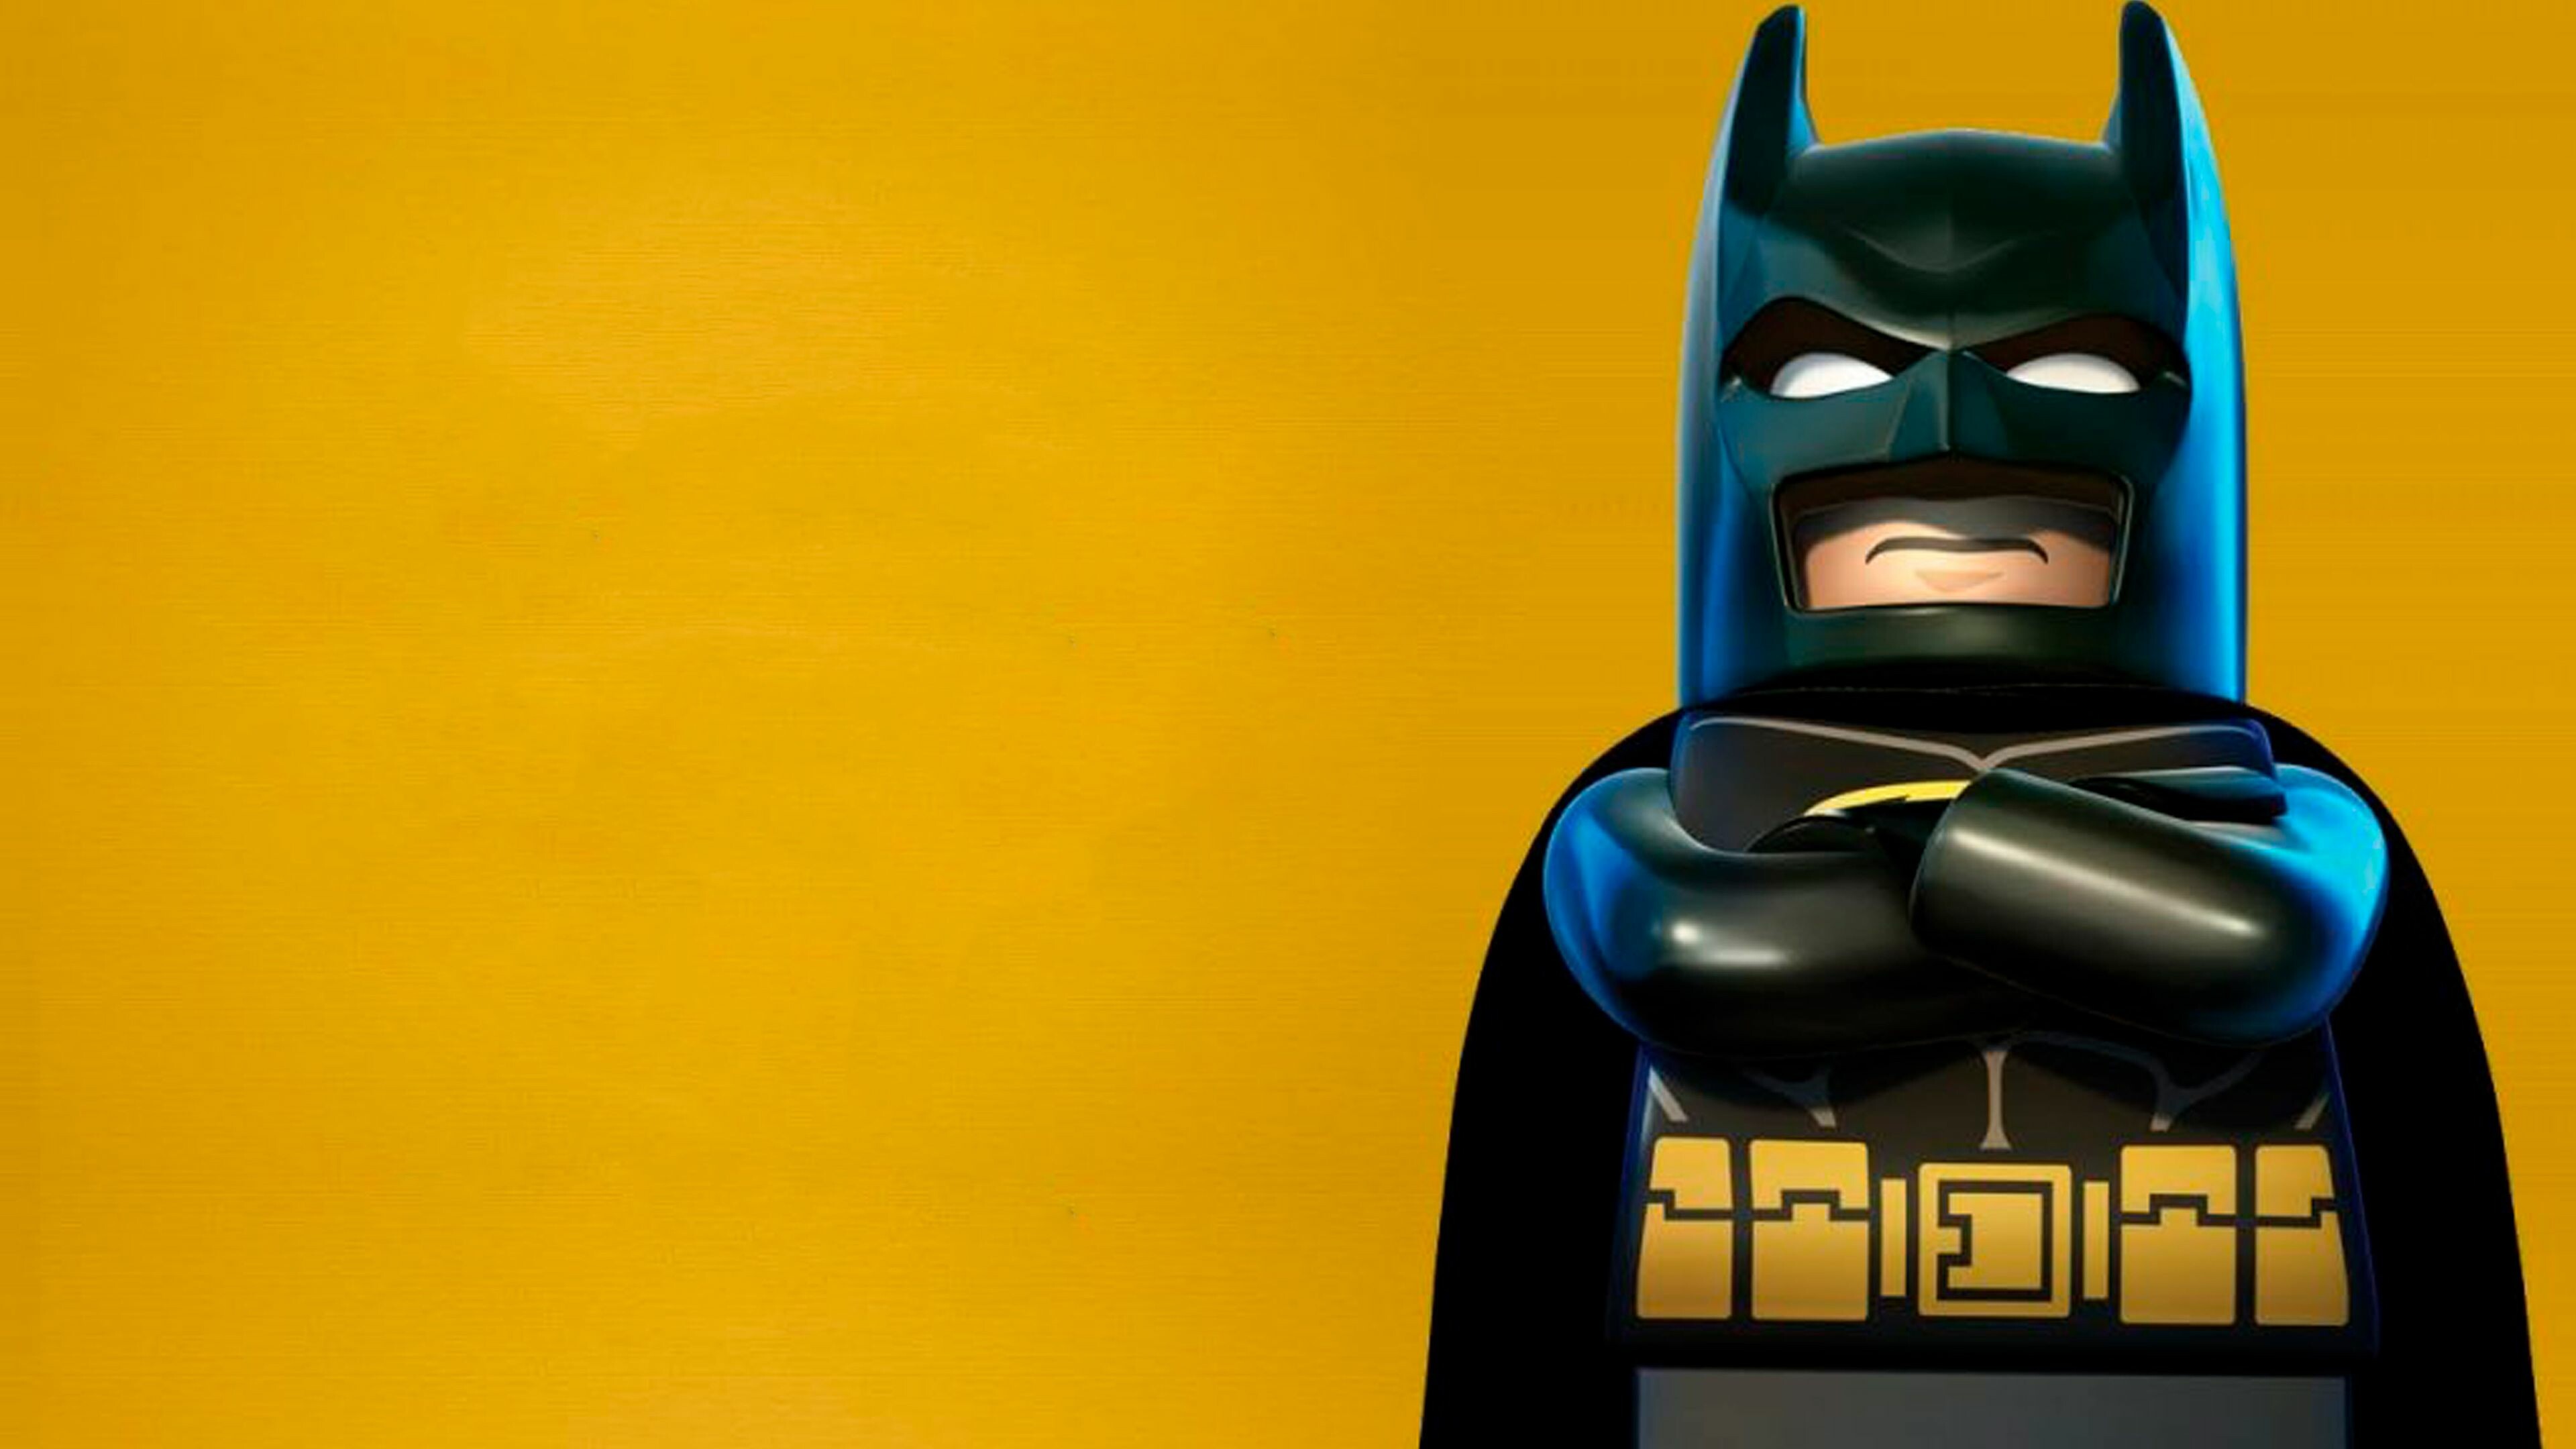 Lego: Batman, Can be used to teach children basic engineering and construction principles. 3840x2160 4K Wallpaper.